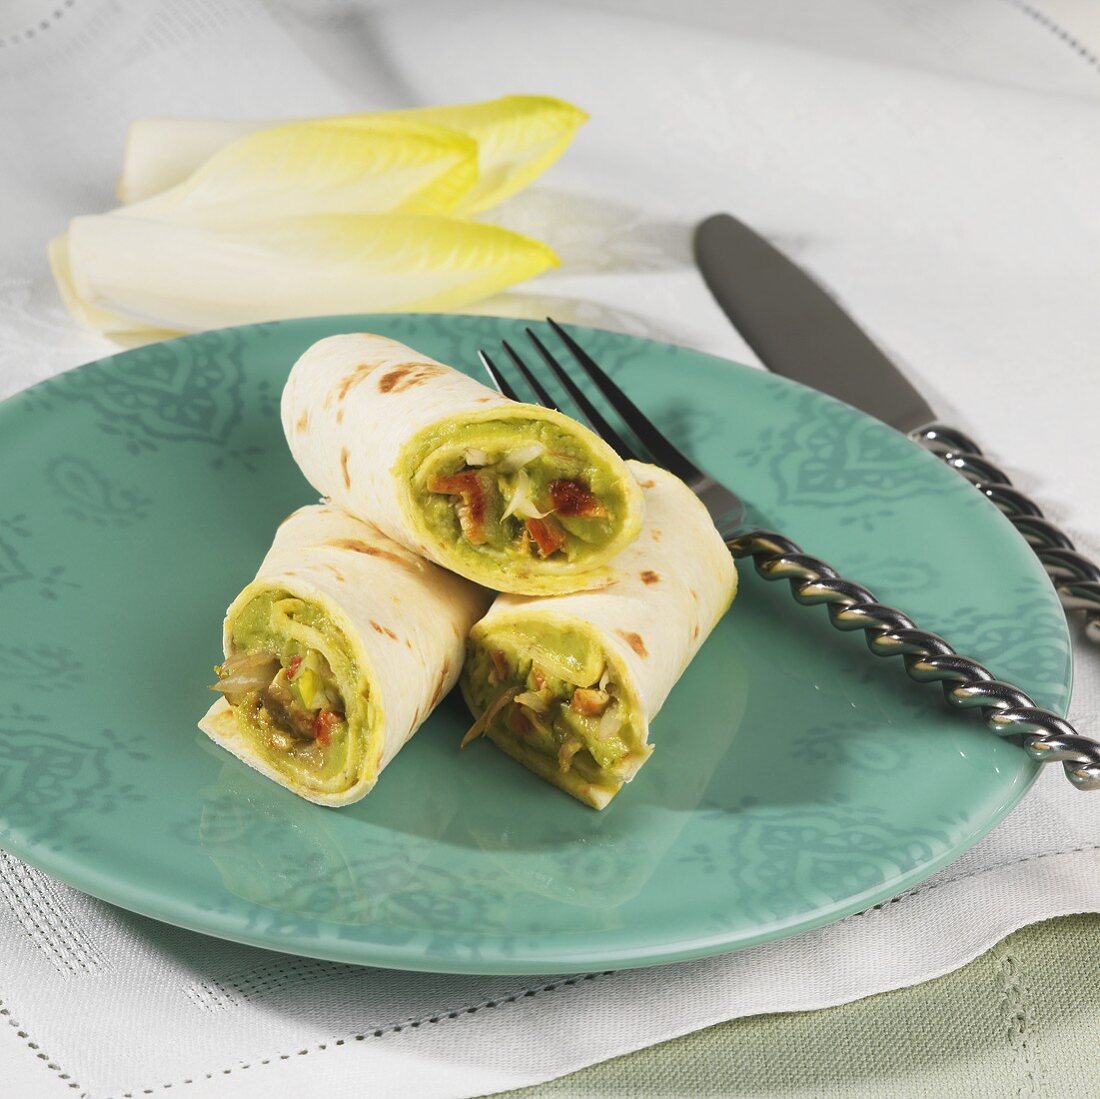 Wraps filled with avocado and chicory